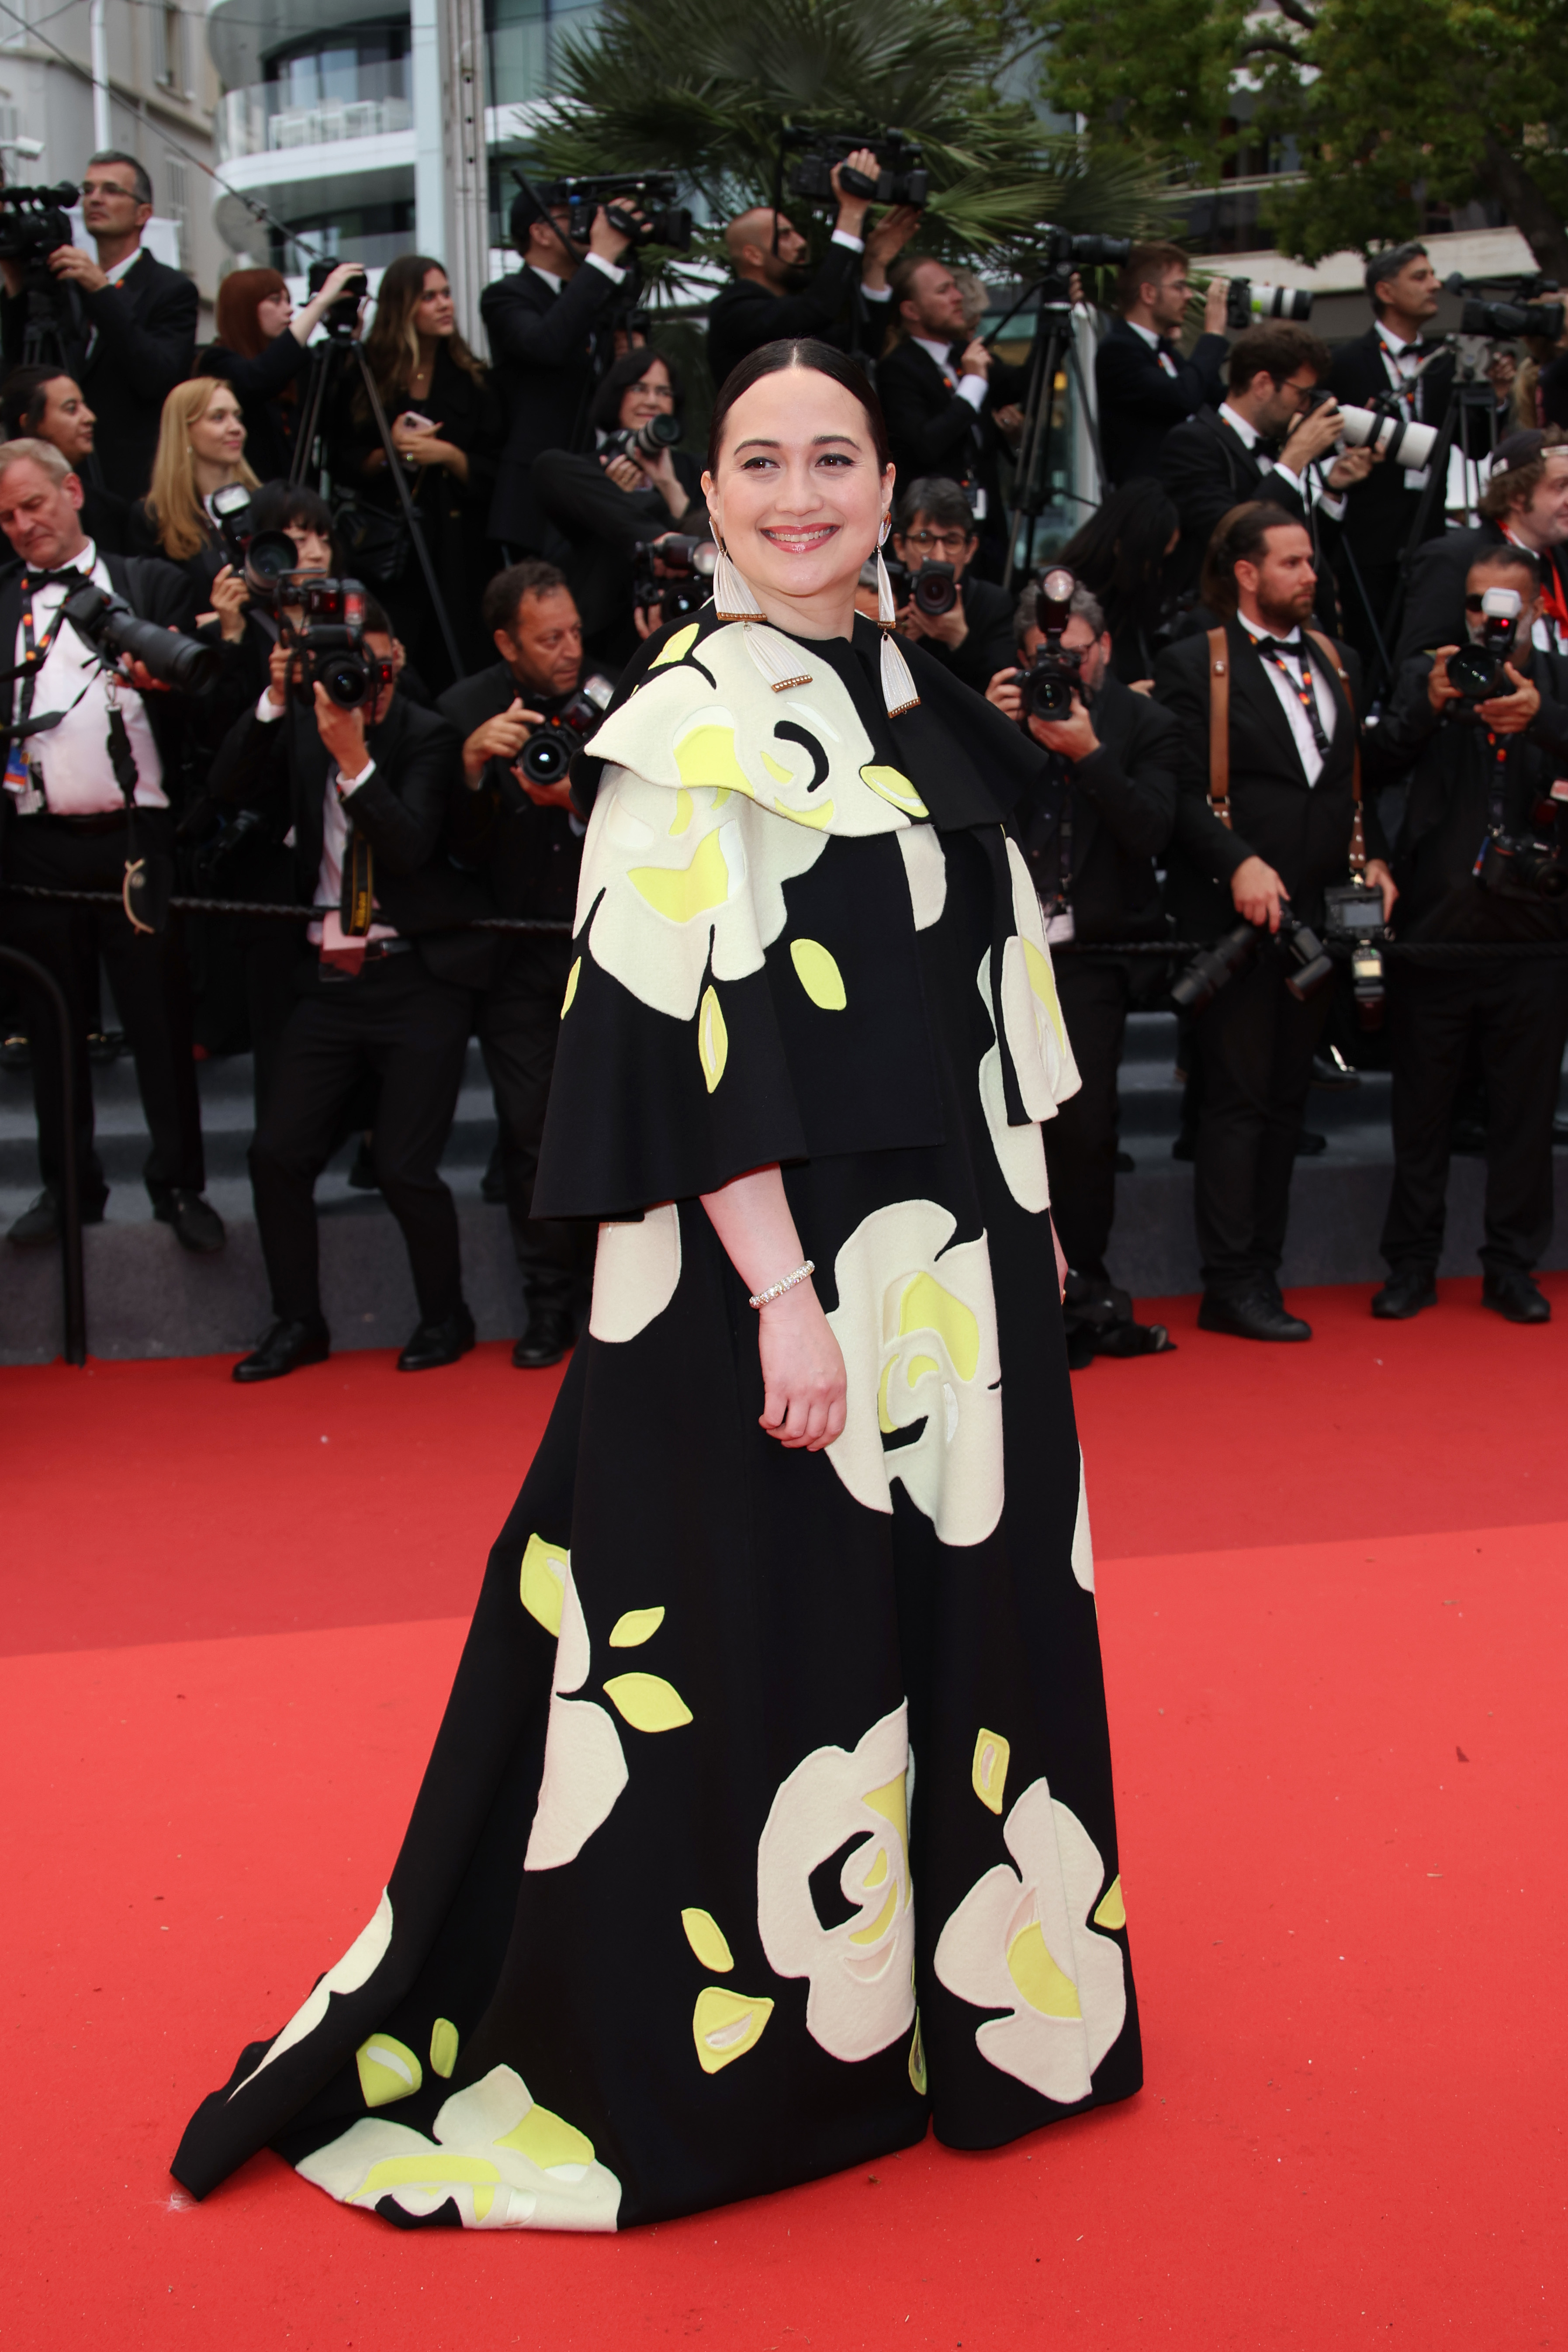 Woman in a floral patterned gown poses on the red carpet with photographers in the background